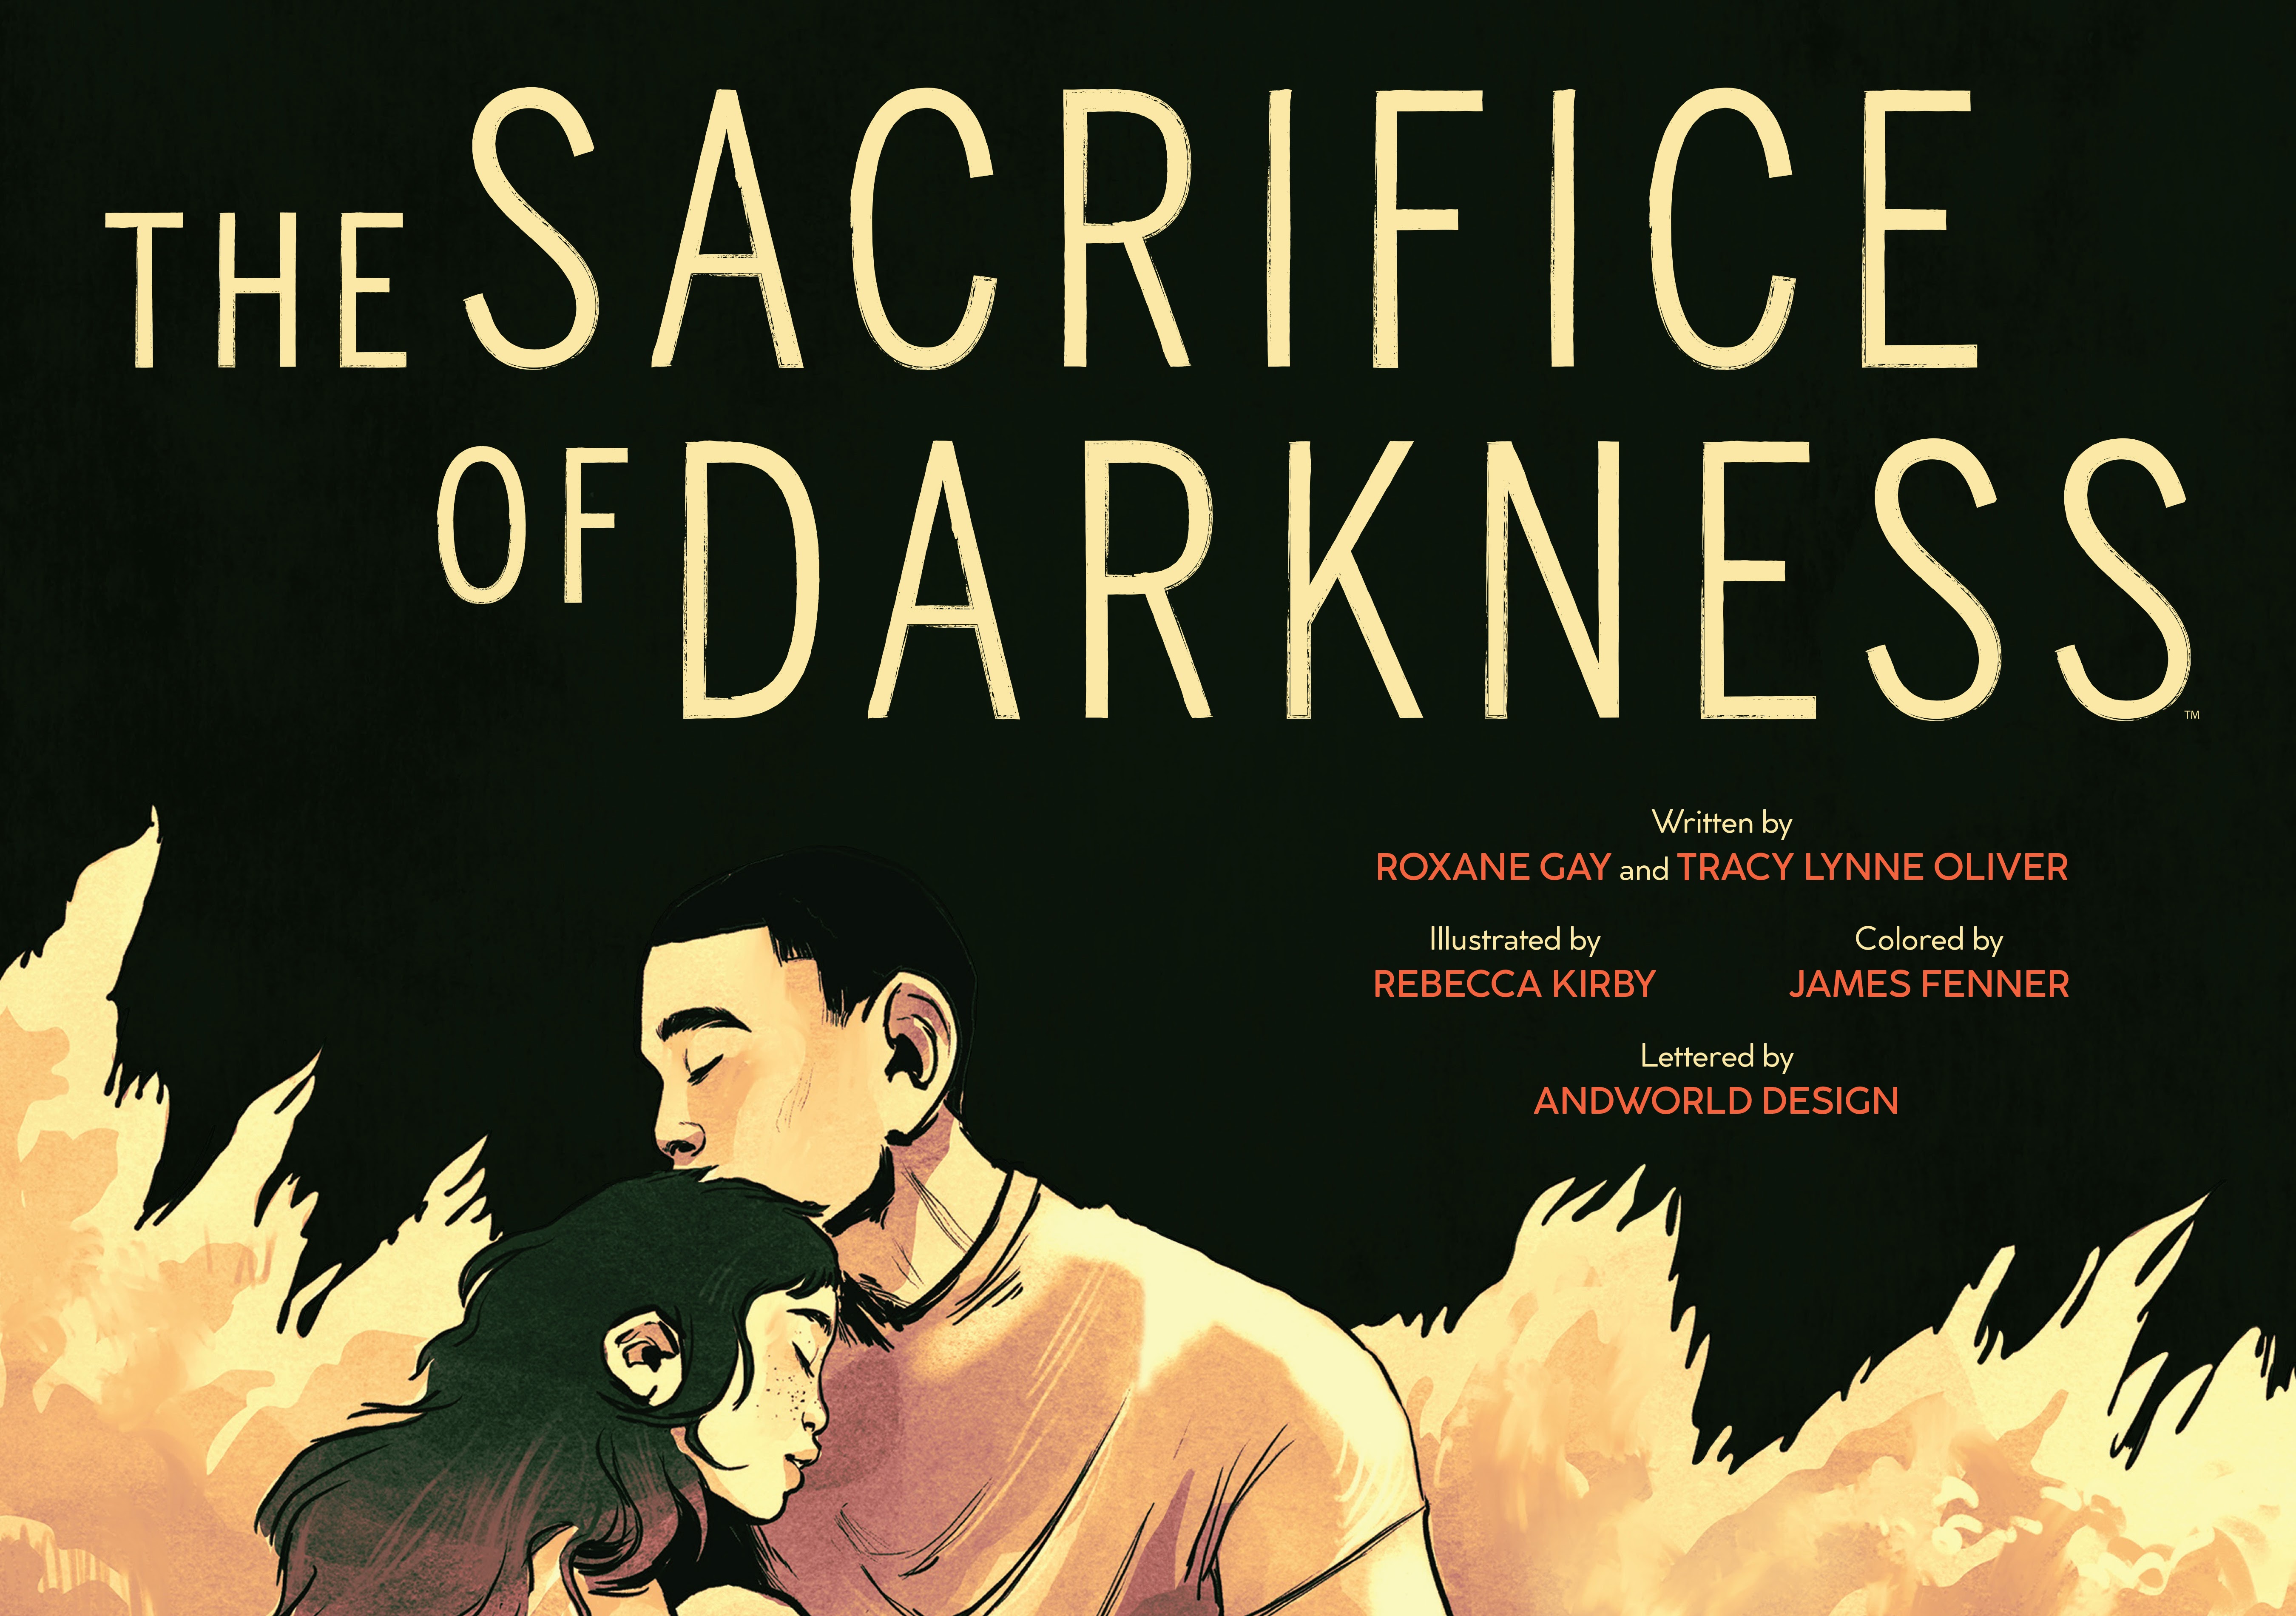 Read online The Sacrifice of Darkness comic -  Issue # TPB - 4